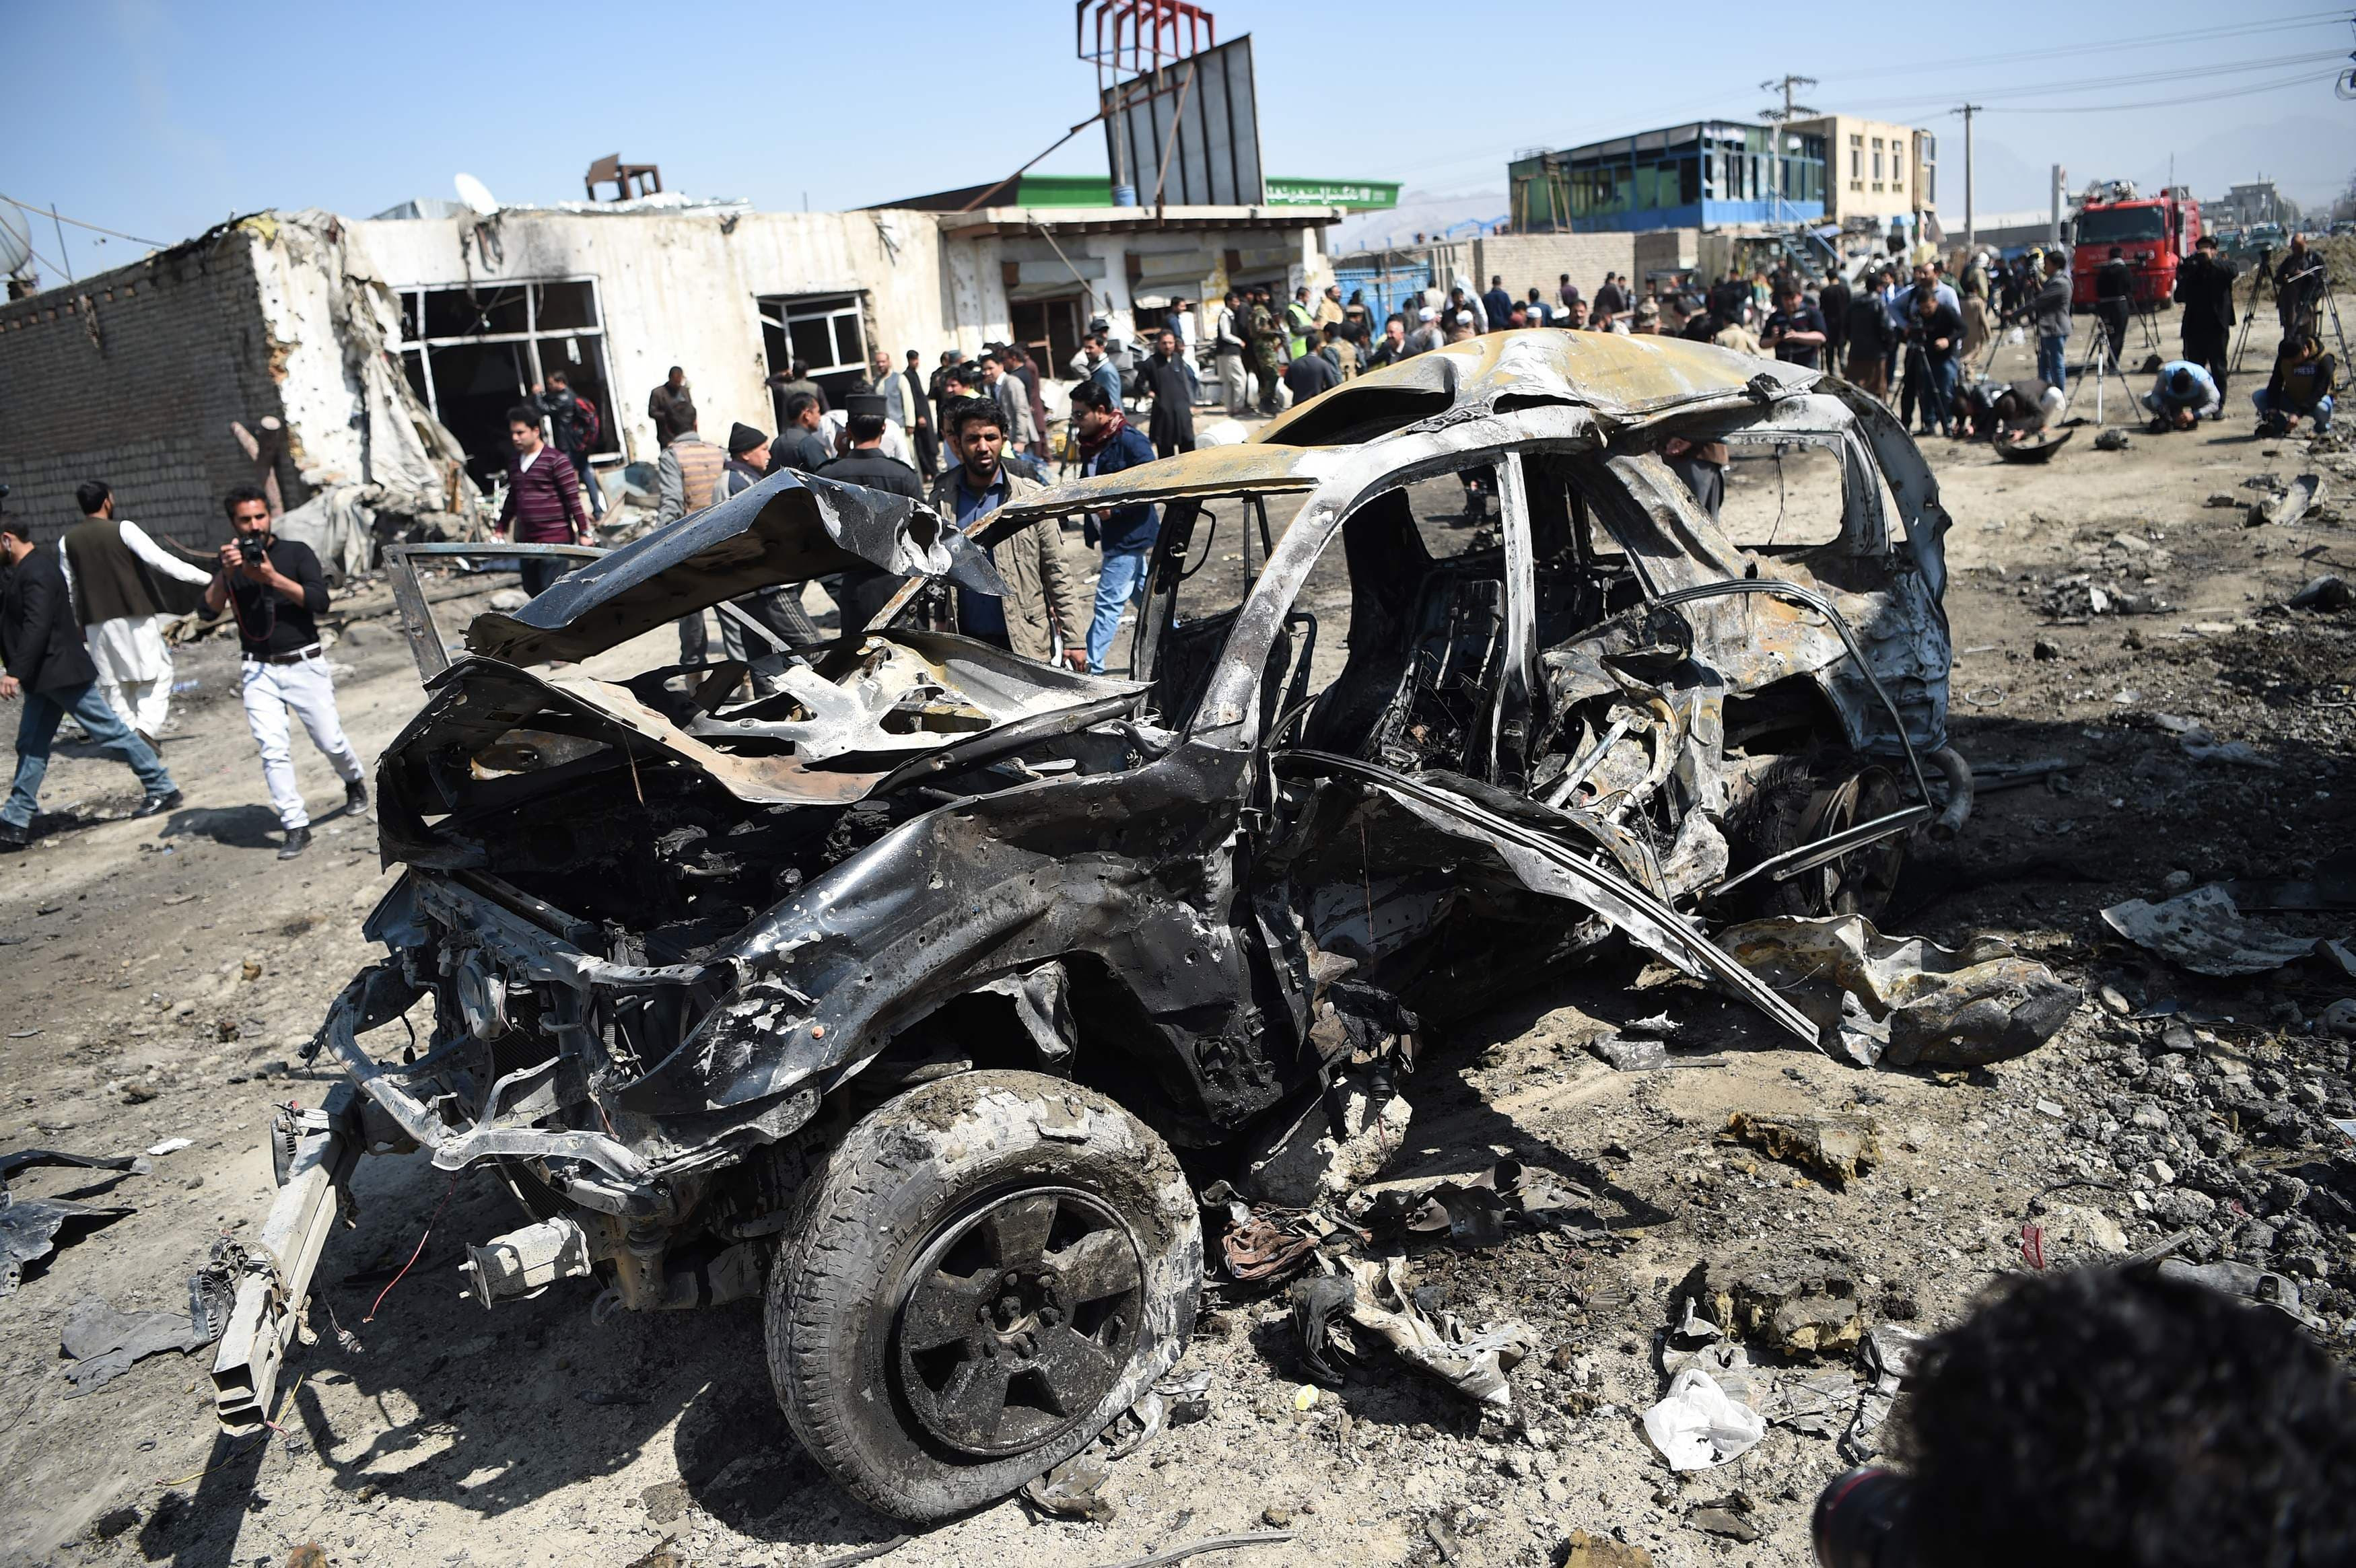 Afghan security personnel and civilians gather next to a damaged car at the site of a car bomb attack in Kabul on March 17, 2018. [Photo: AFP]